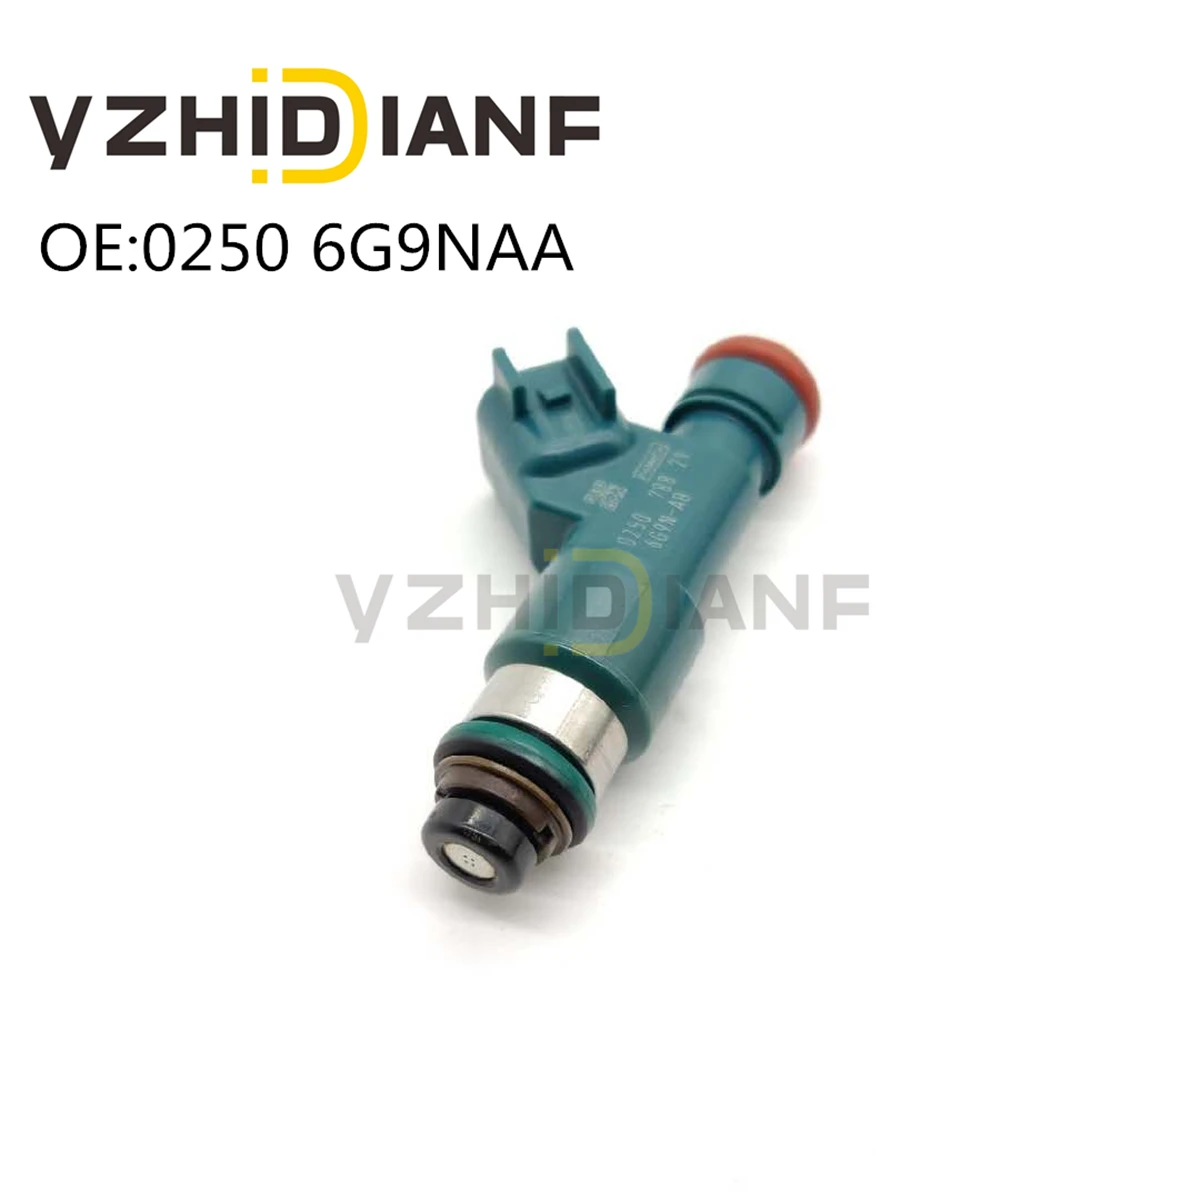 

1x Injection Nozzle fuel injectors OE 0250 6G9NAA 6G9N-AA FJ1066 M1378 4G2220 67673 85212259 for Volvo- S80/V70/XC60/70/90